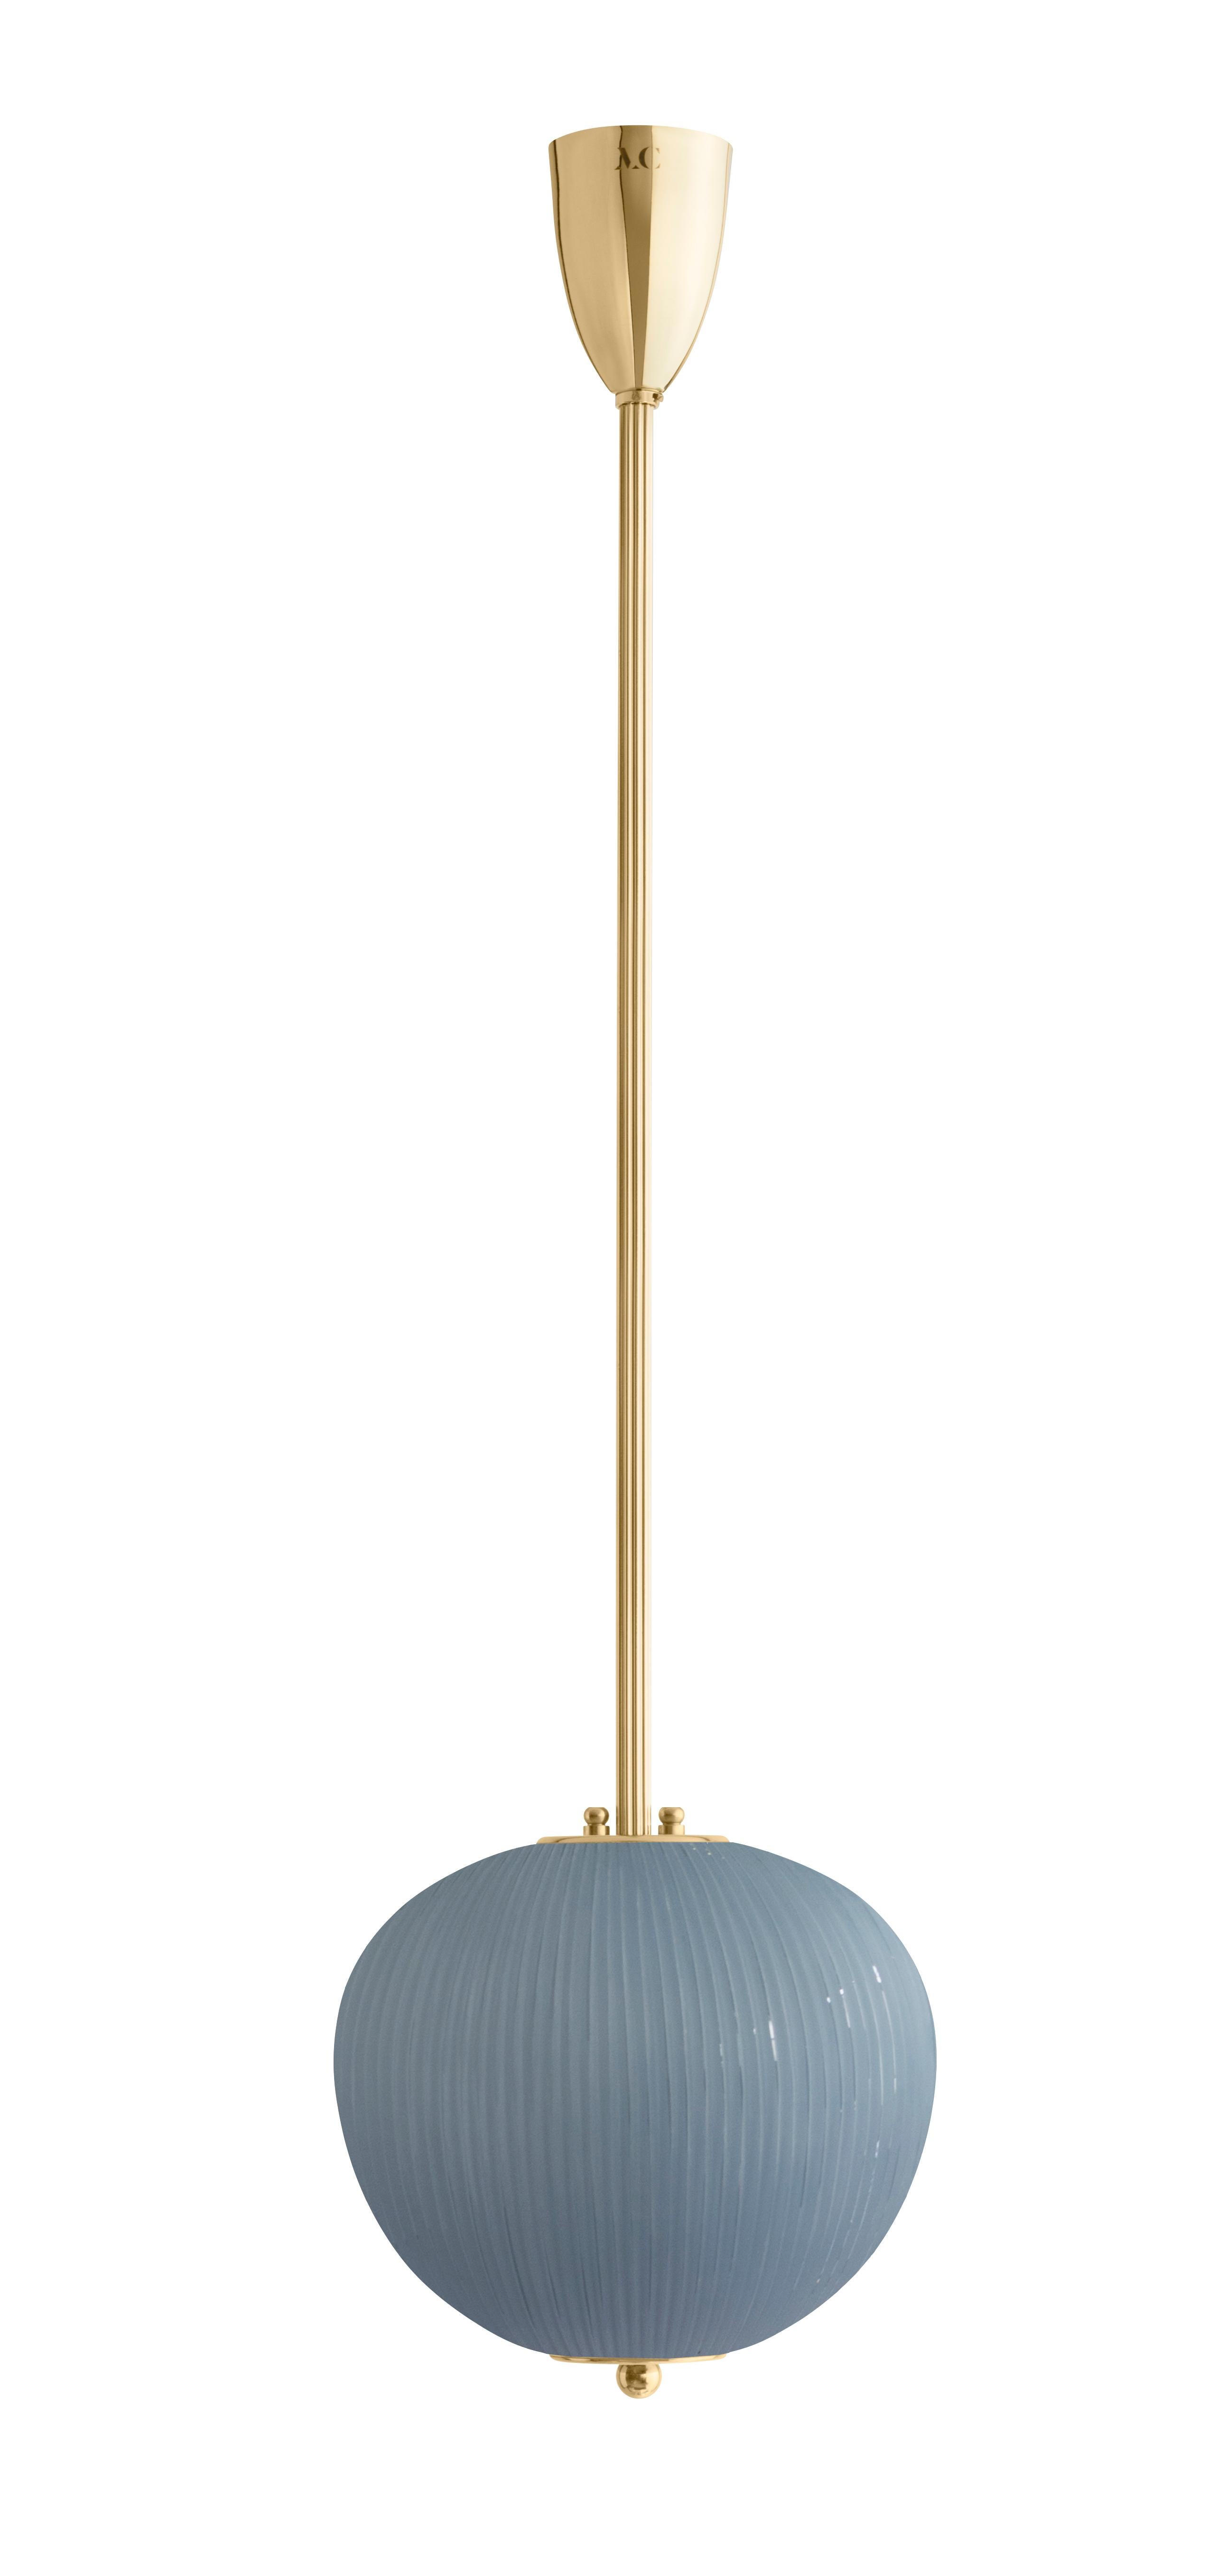 Pendant China 03 by Magic Circus Editions
Dimensions: H 90 x W 26.2 x D 26.2 cm, also available in H 110, 130, 150, 175, 190
Materials: Brass, mouth blown glass sculpted with a diamond saw
Colour: Opal grey

Available finishes: Brass,